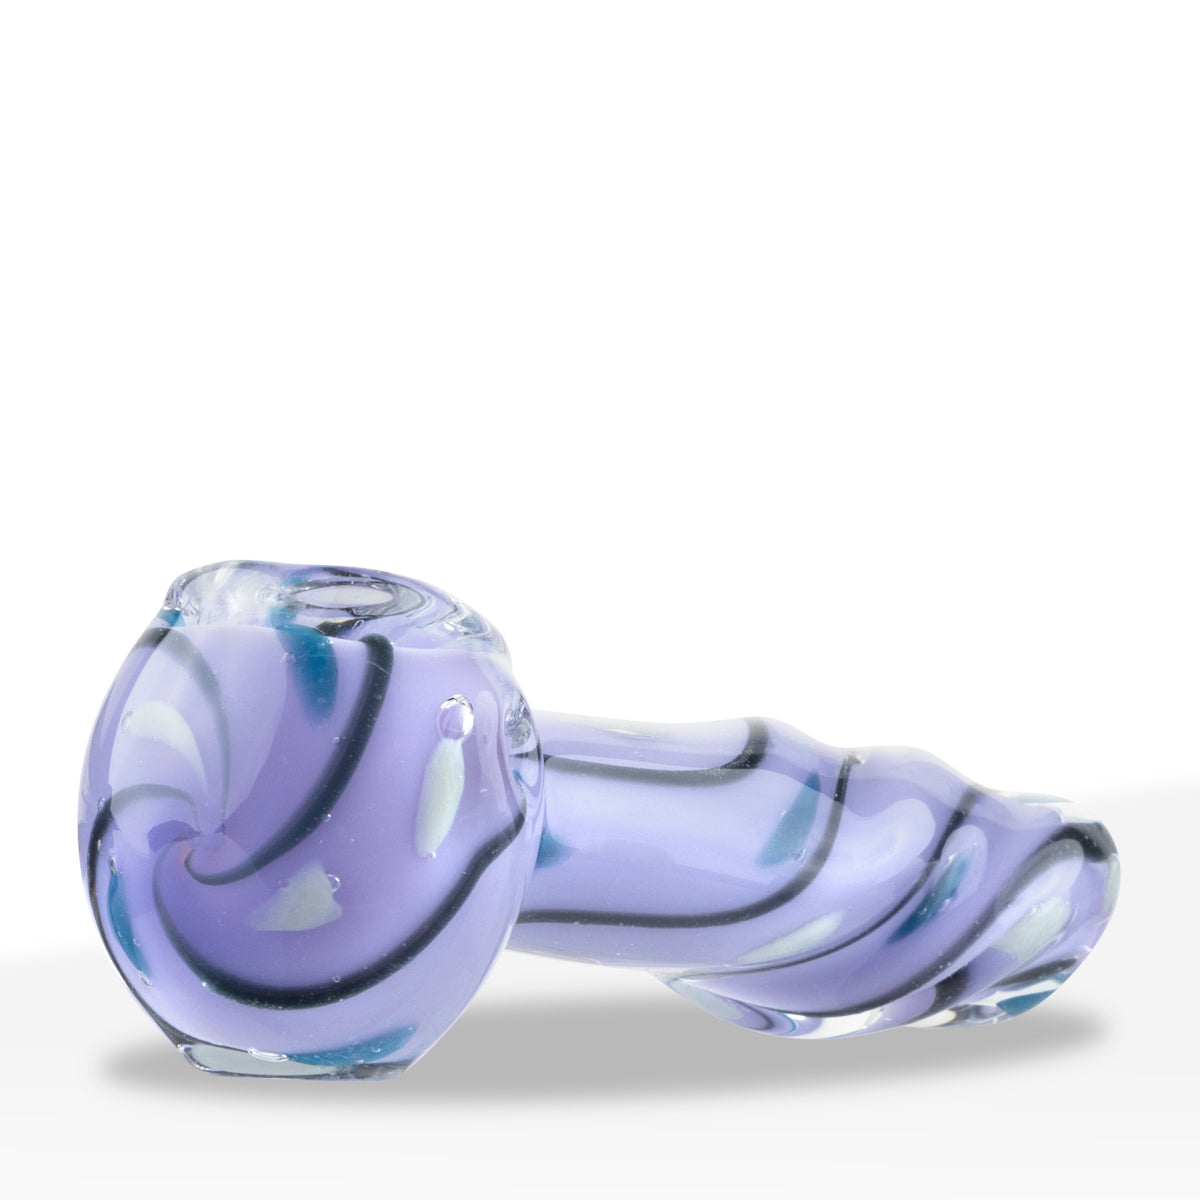 Hand Pipe | Classic Glass Spoon Slyme Lines + Dots Hand Pipe | 3.5" - Glass - 3 Count